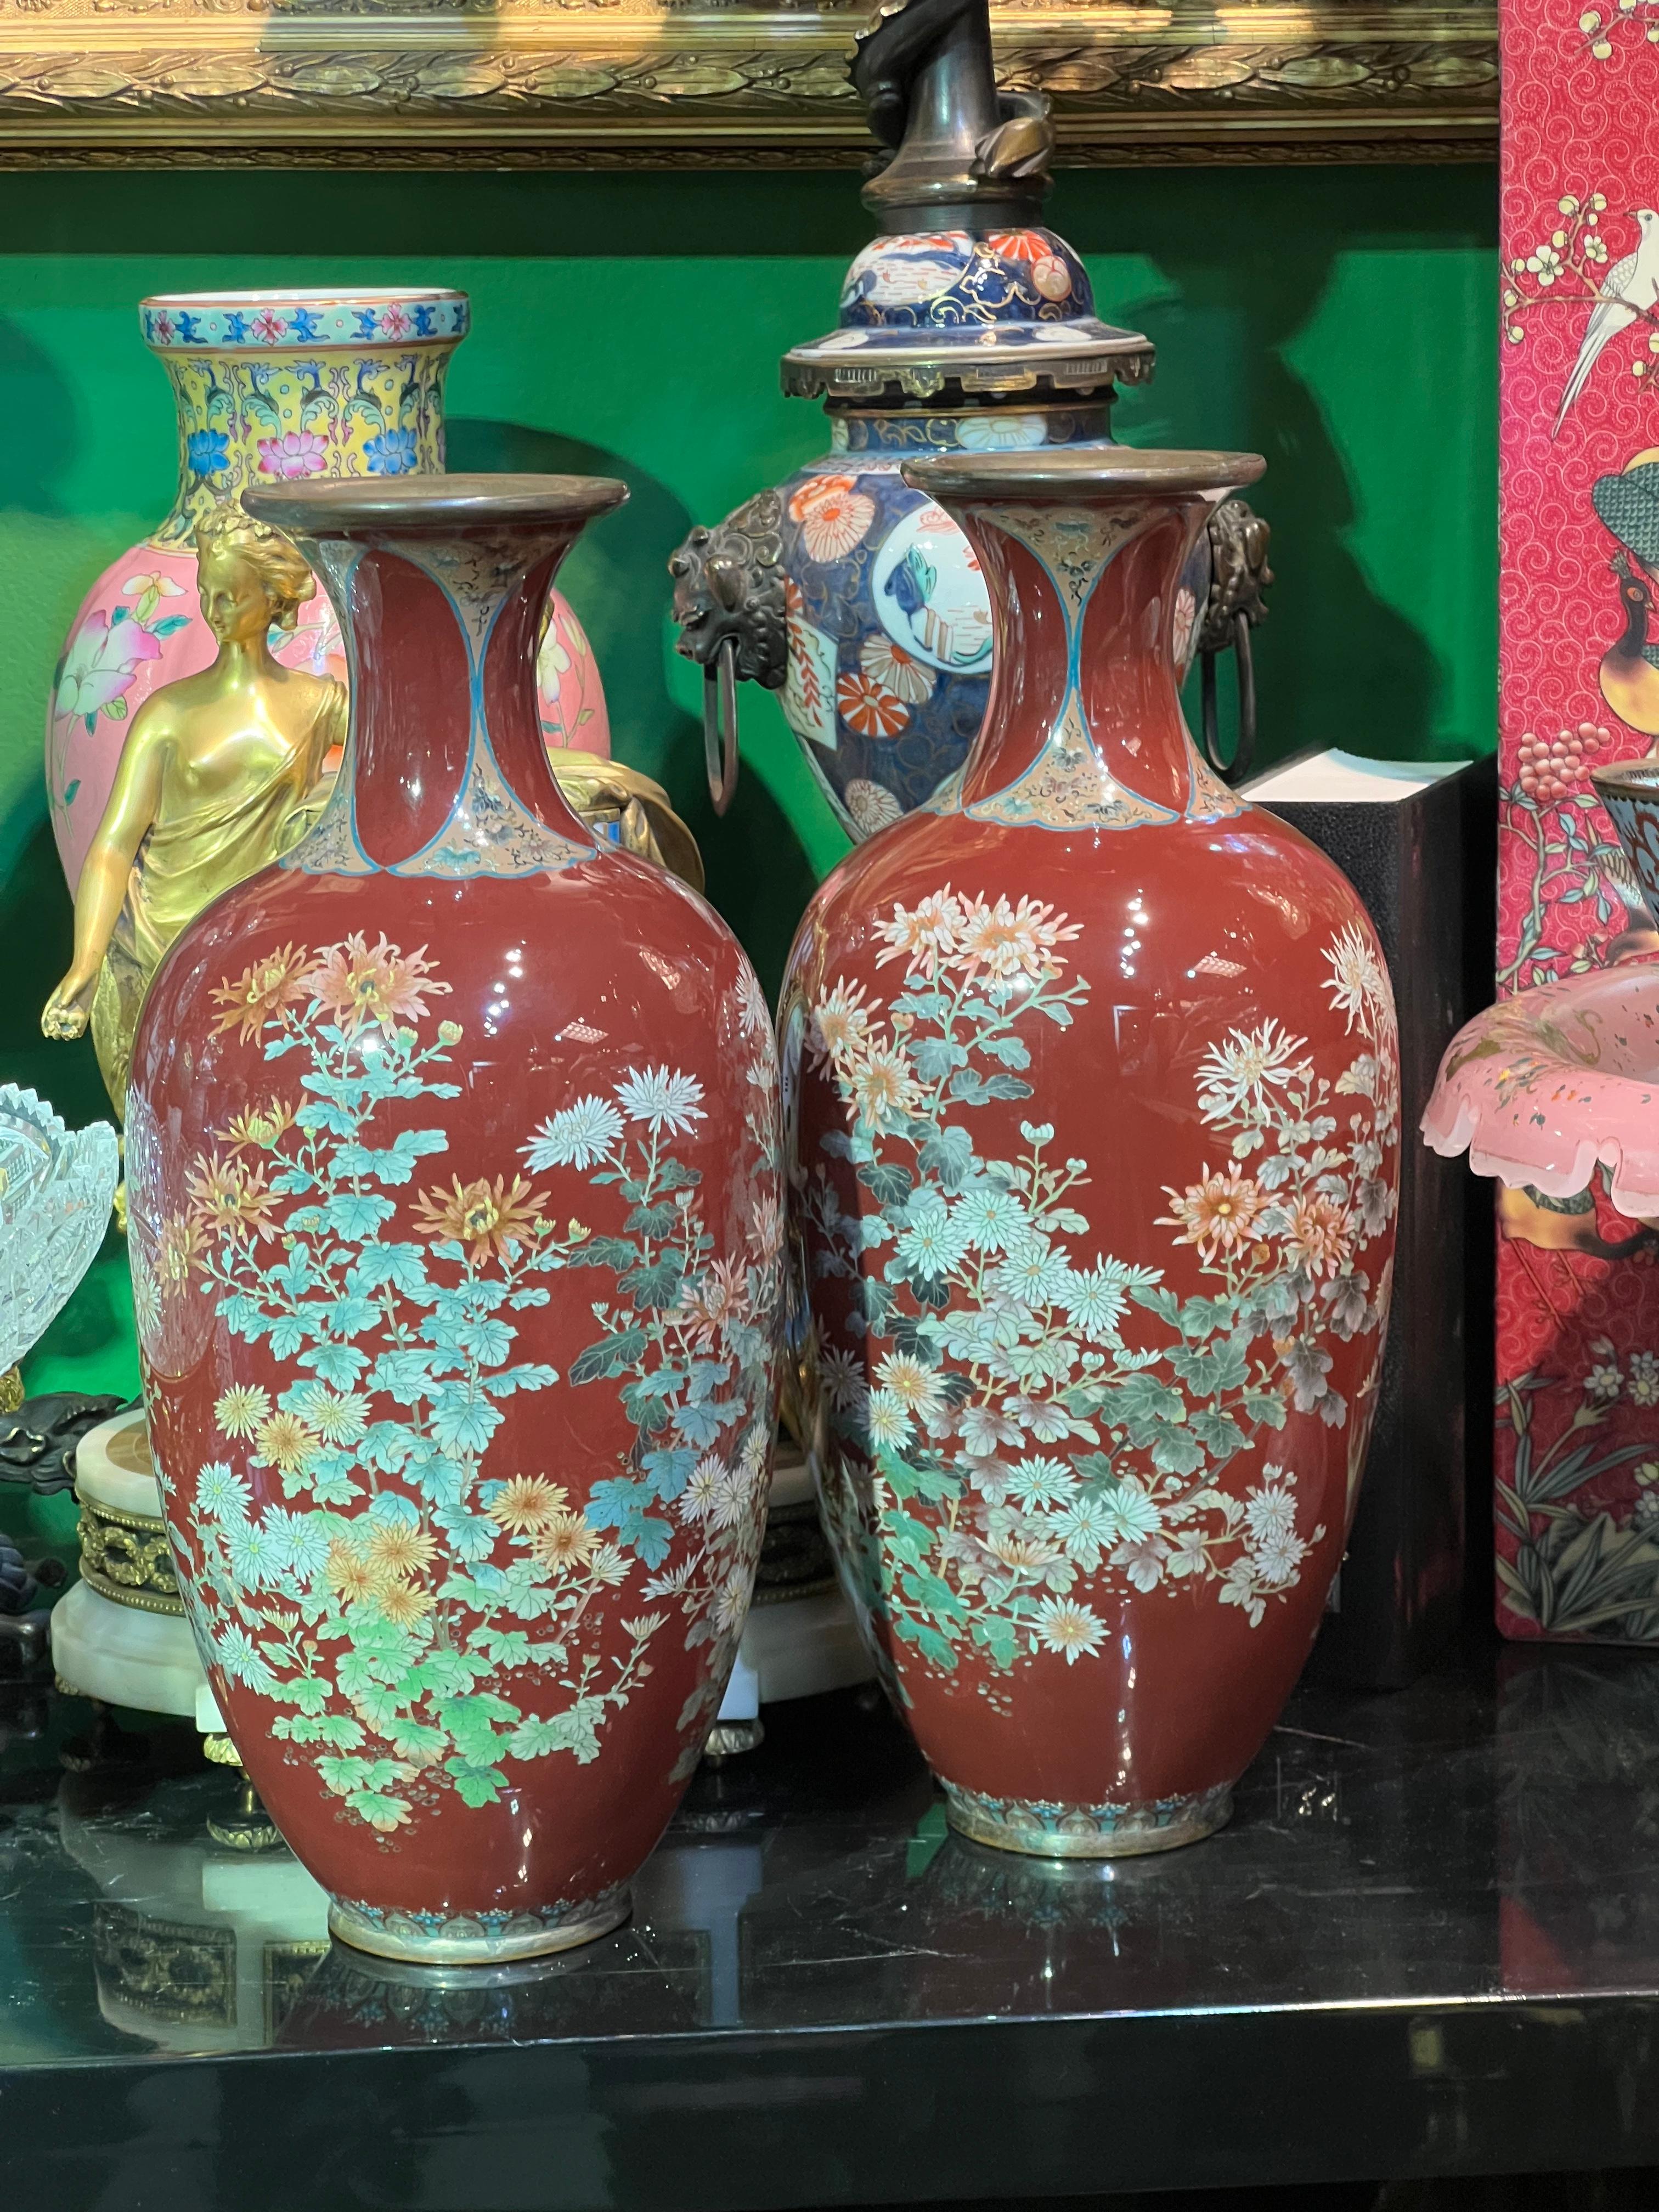 A Large Rare Pair Of Red Japanese Cloisonne Enamel Vases Gardens in Bloom Kawade For Sale 4